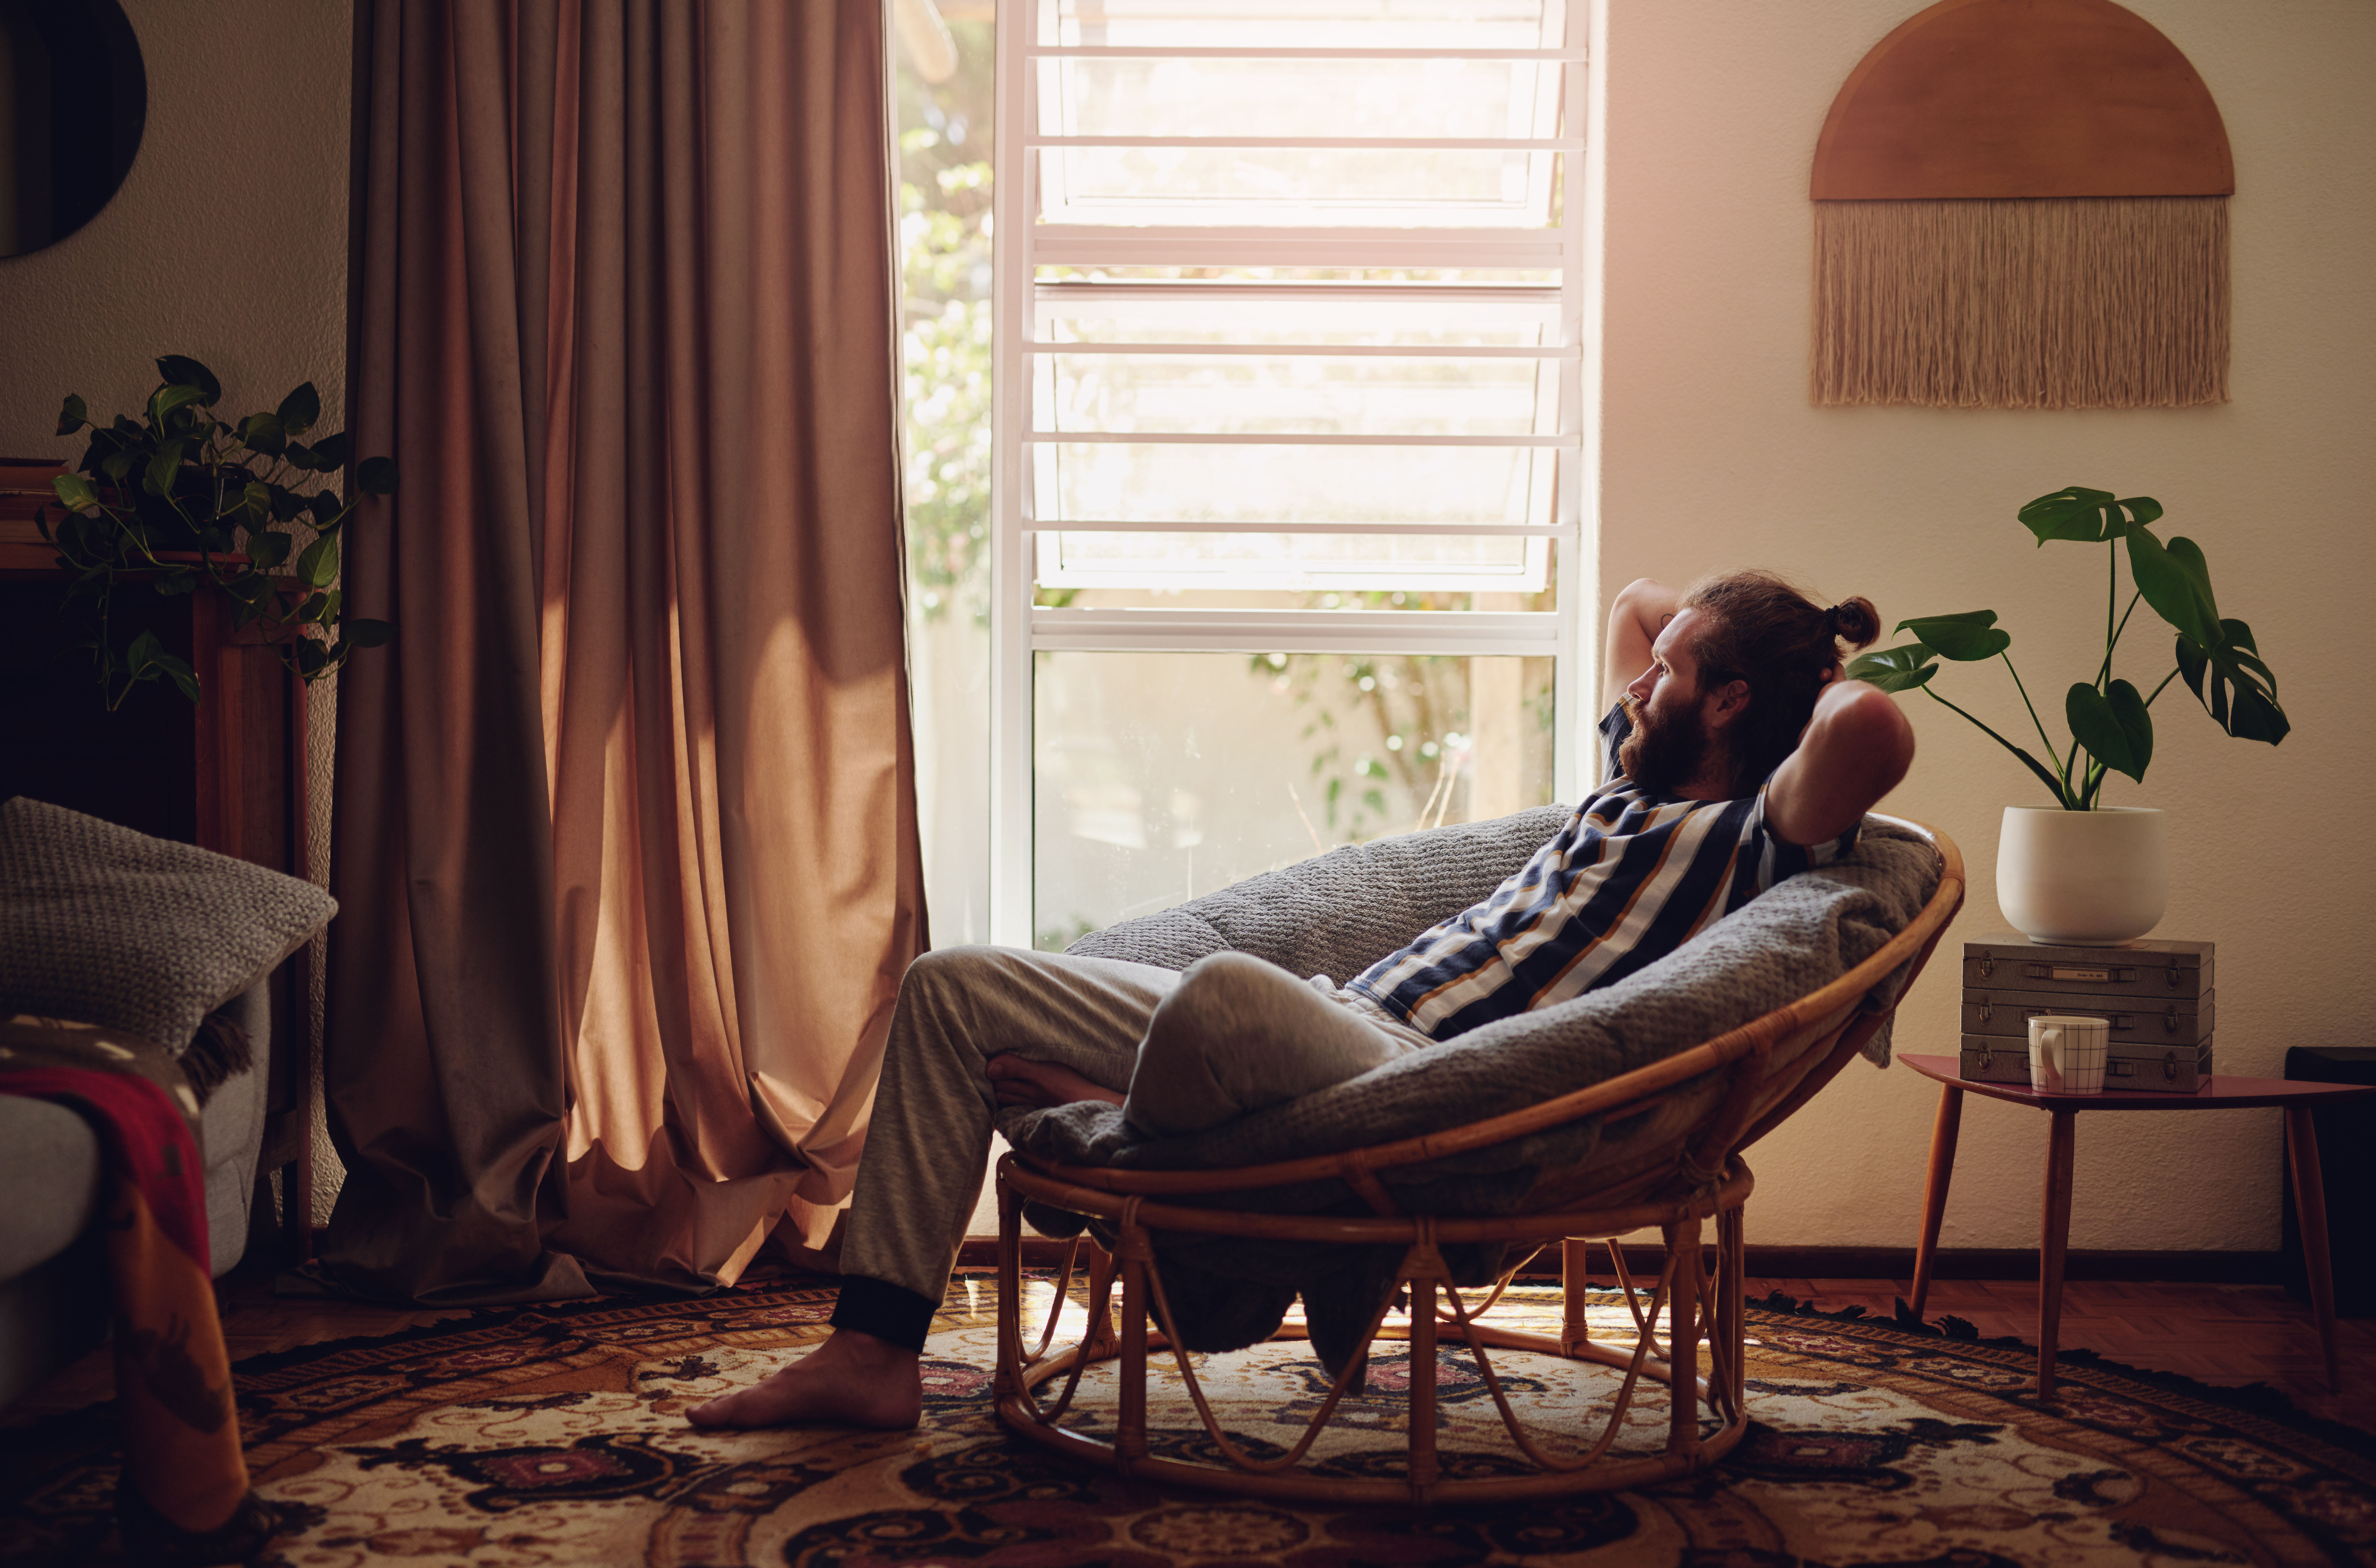 Man with a bun sitting in a bohemian decorated room, looking out of a bright window. . Getty Images photo identifier, 1317367958, Adene Sanchez